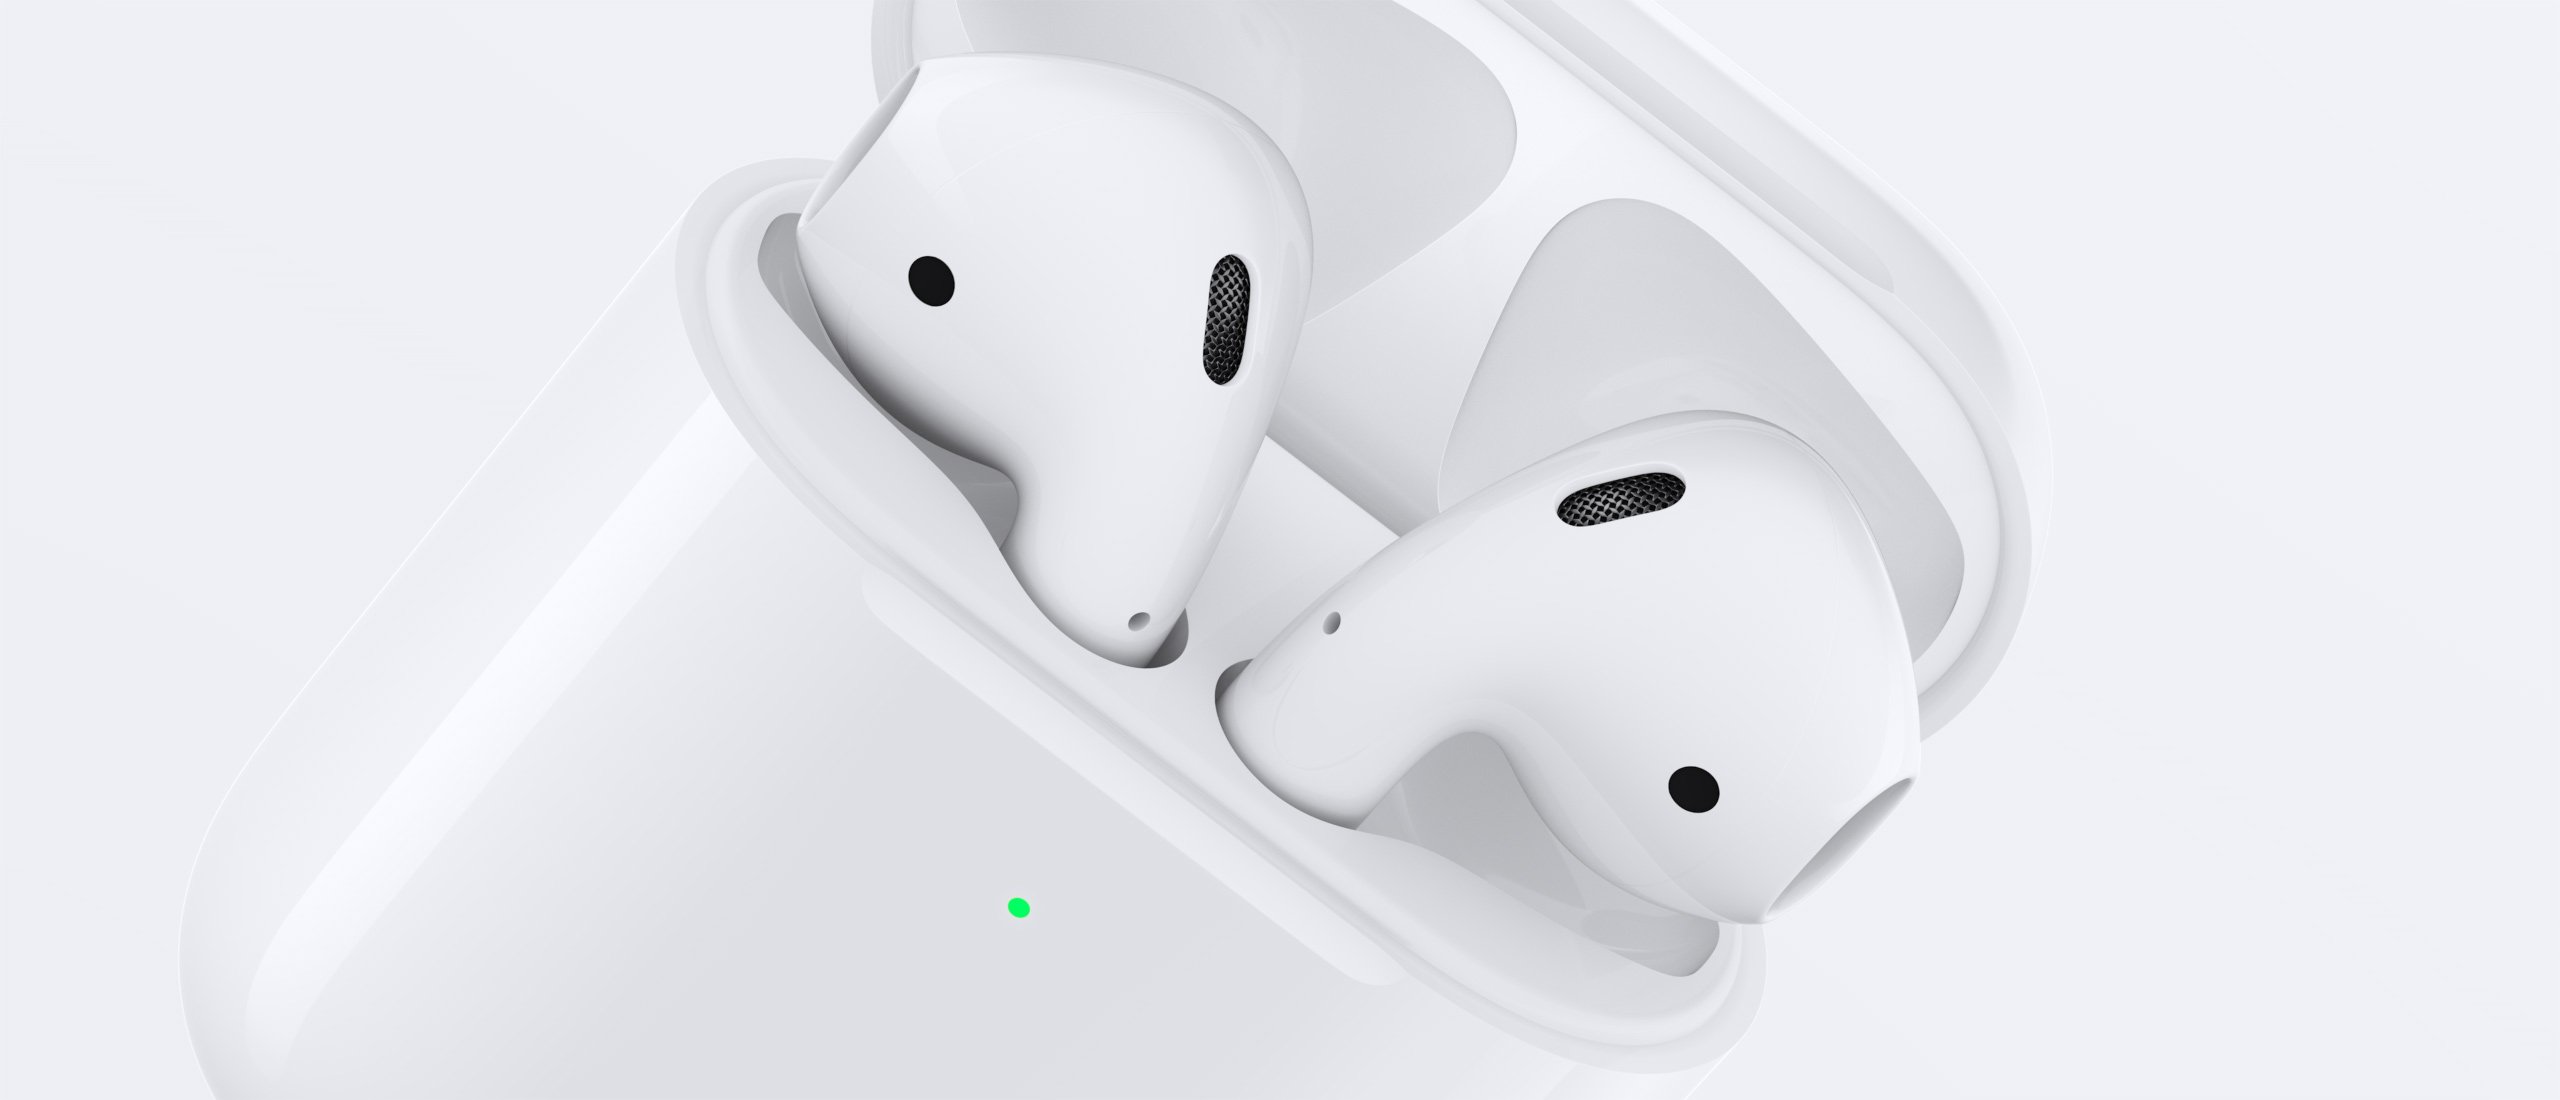 Apple AirPods dominated the TWS Bluetooth earphones market in 2020